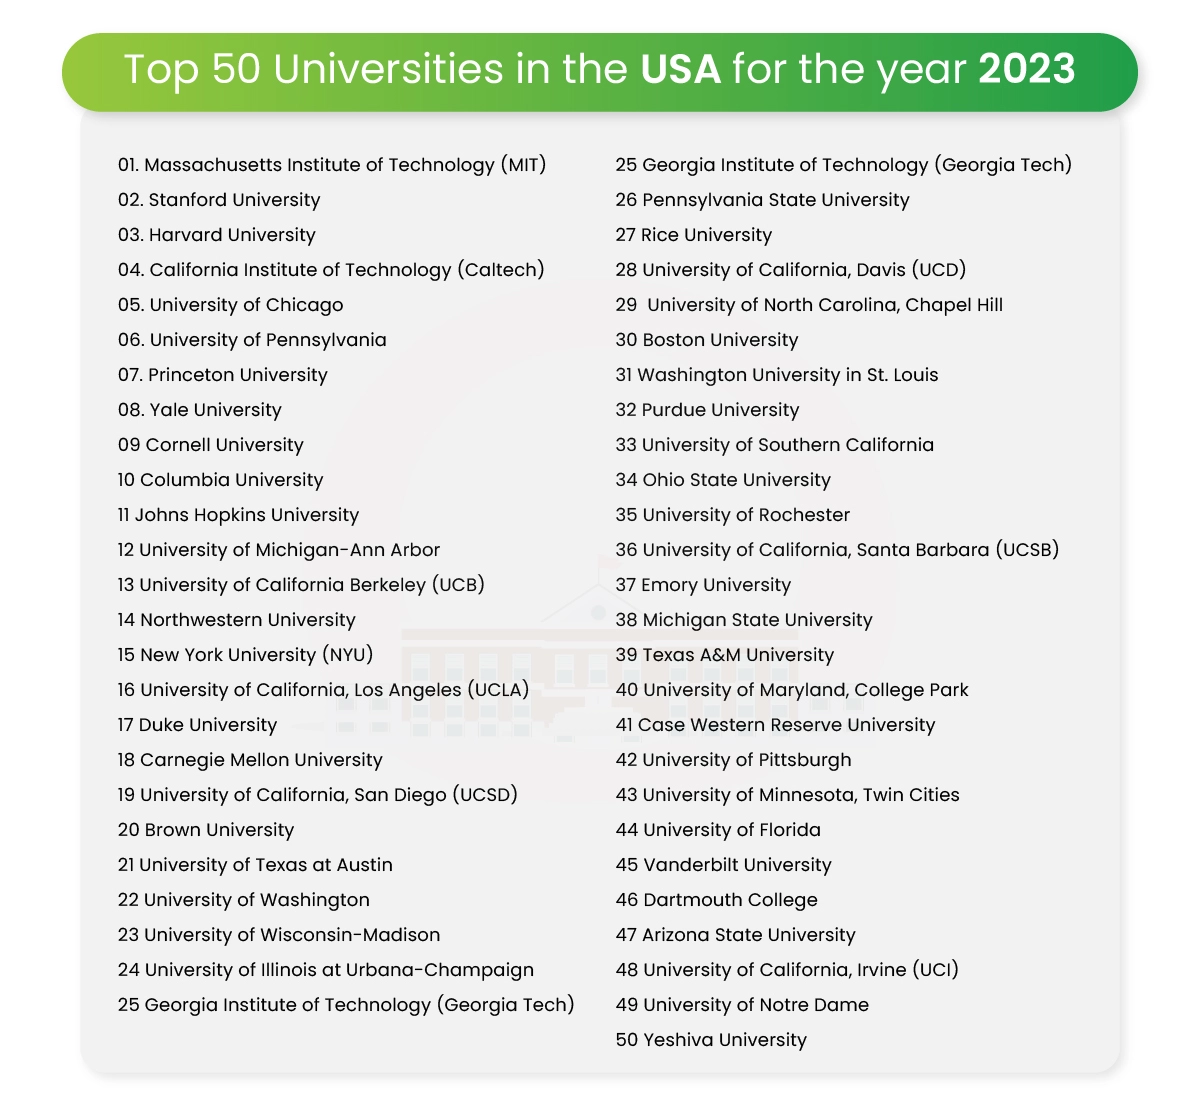 The top 50 U.S. colleges that pay off the most in 2020